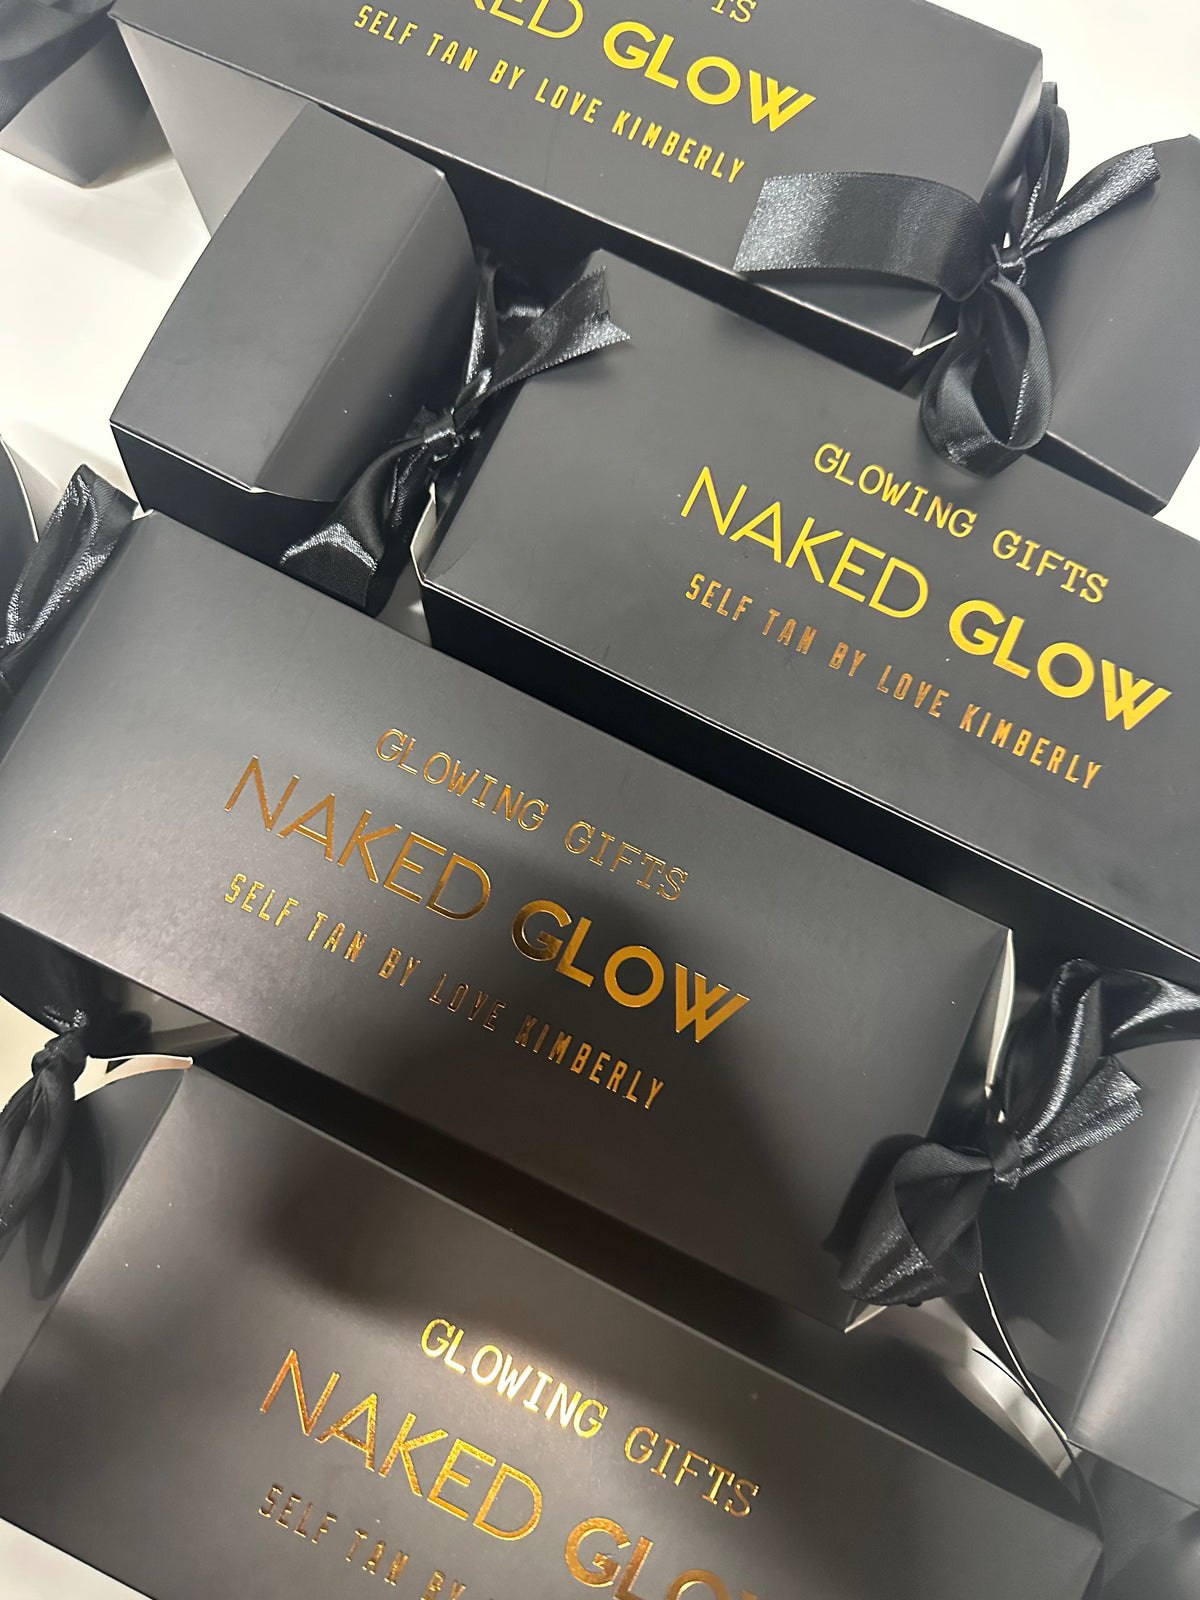 Glowing Gifts Mystery Cracker - NAKED GLOW